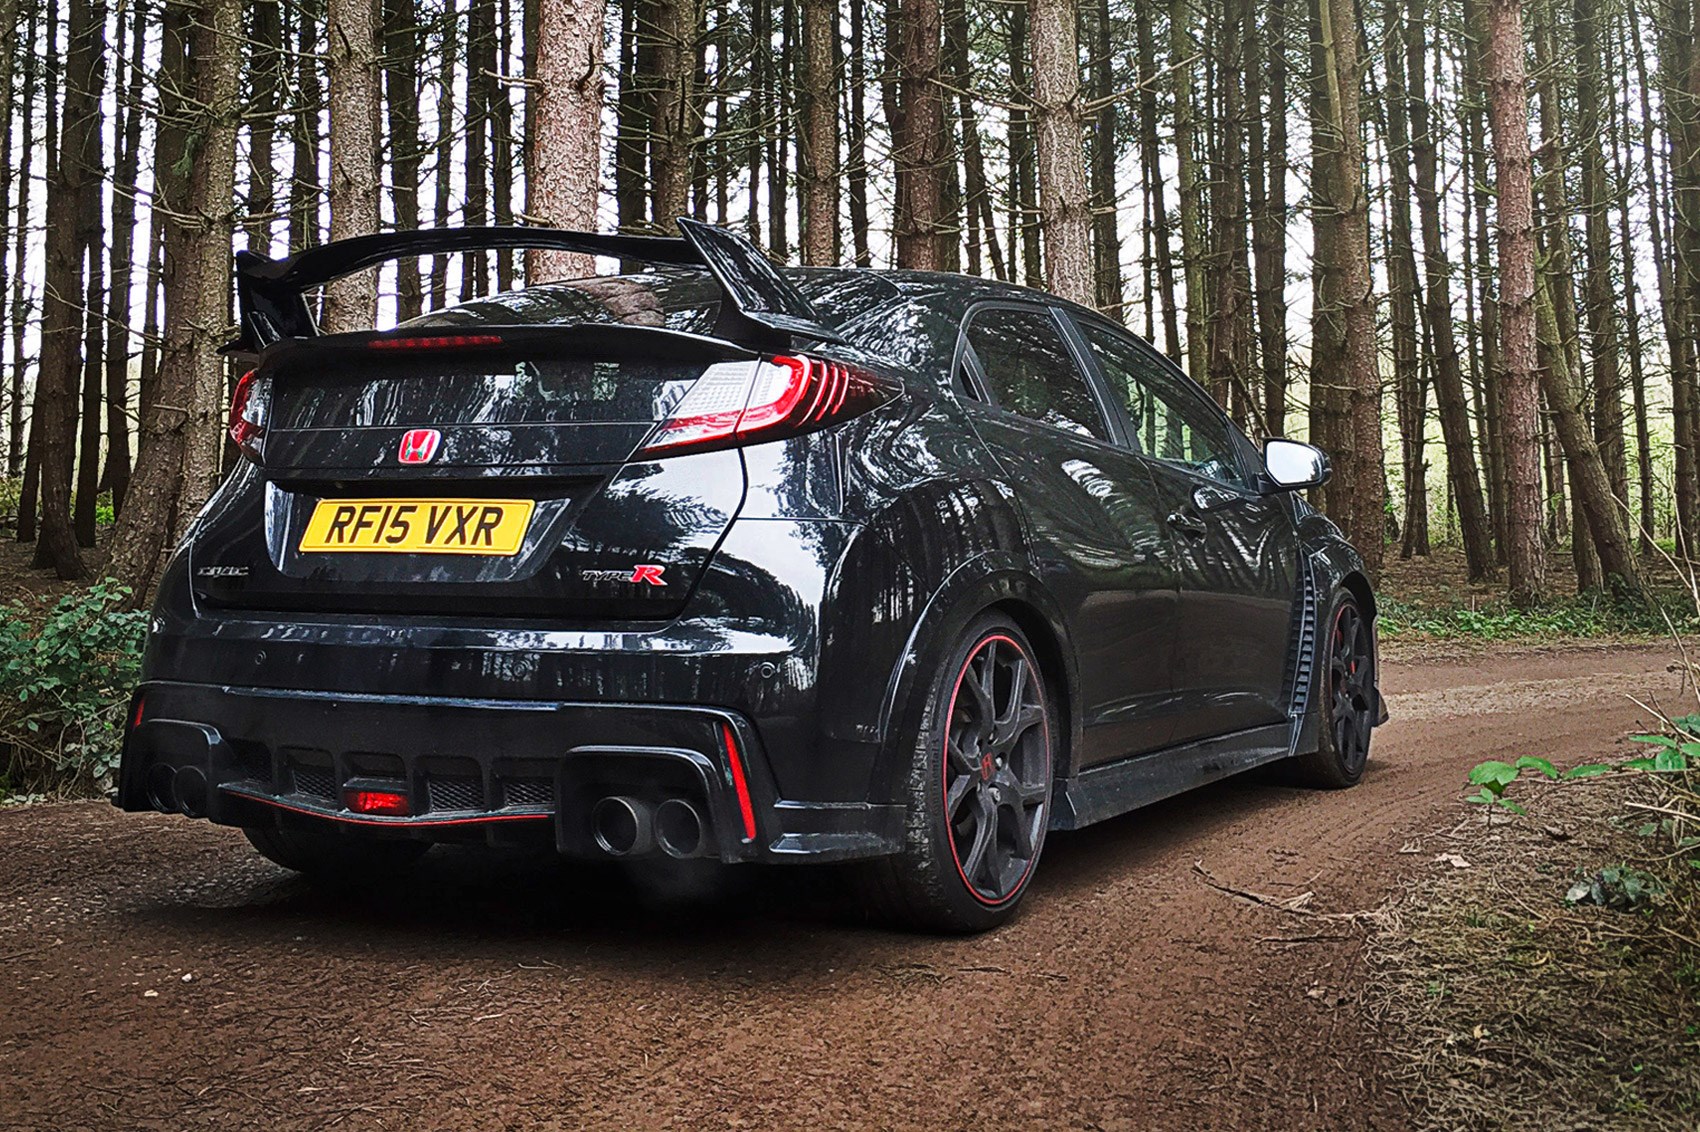 Honda Civic Type R: 'A monster disguised as a family hatch', Motoring